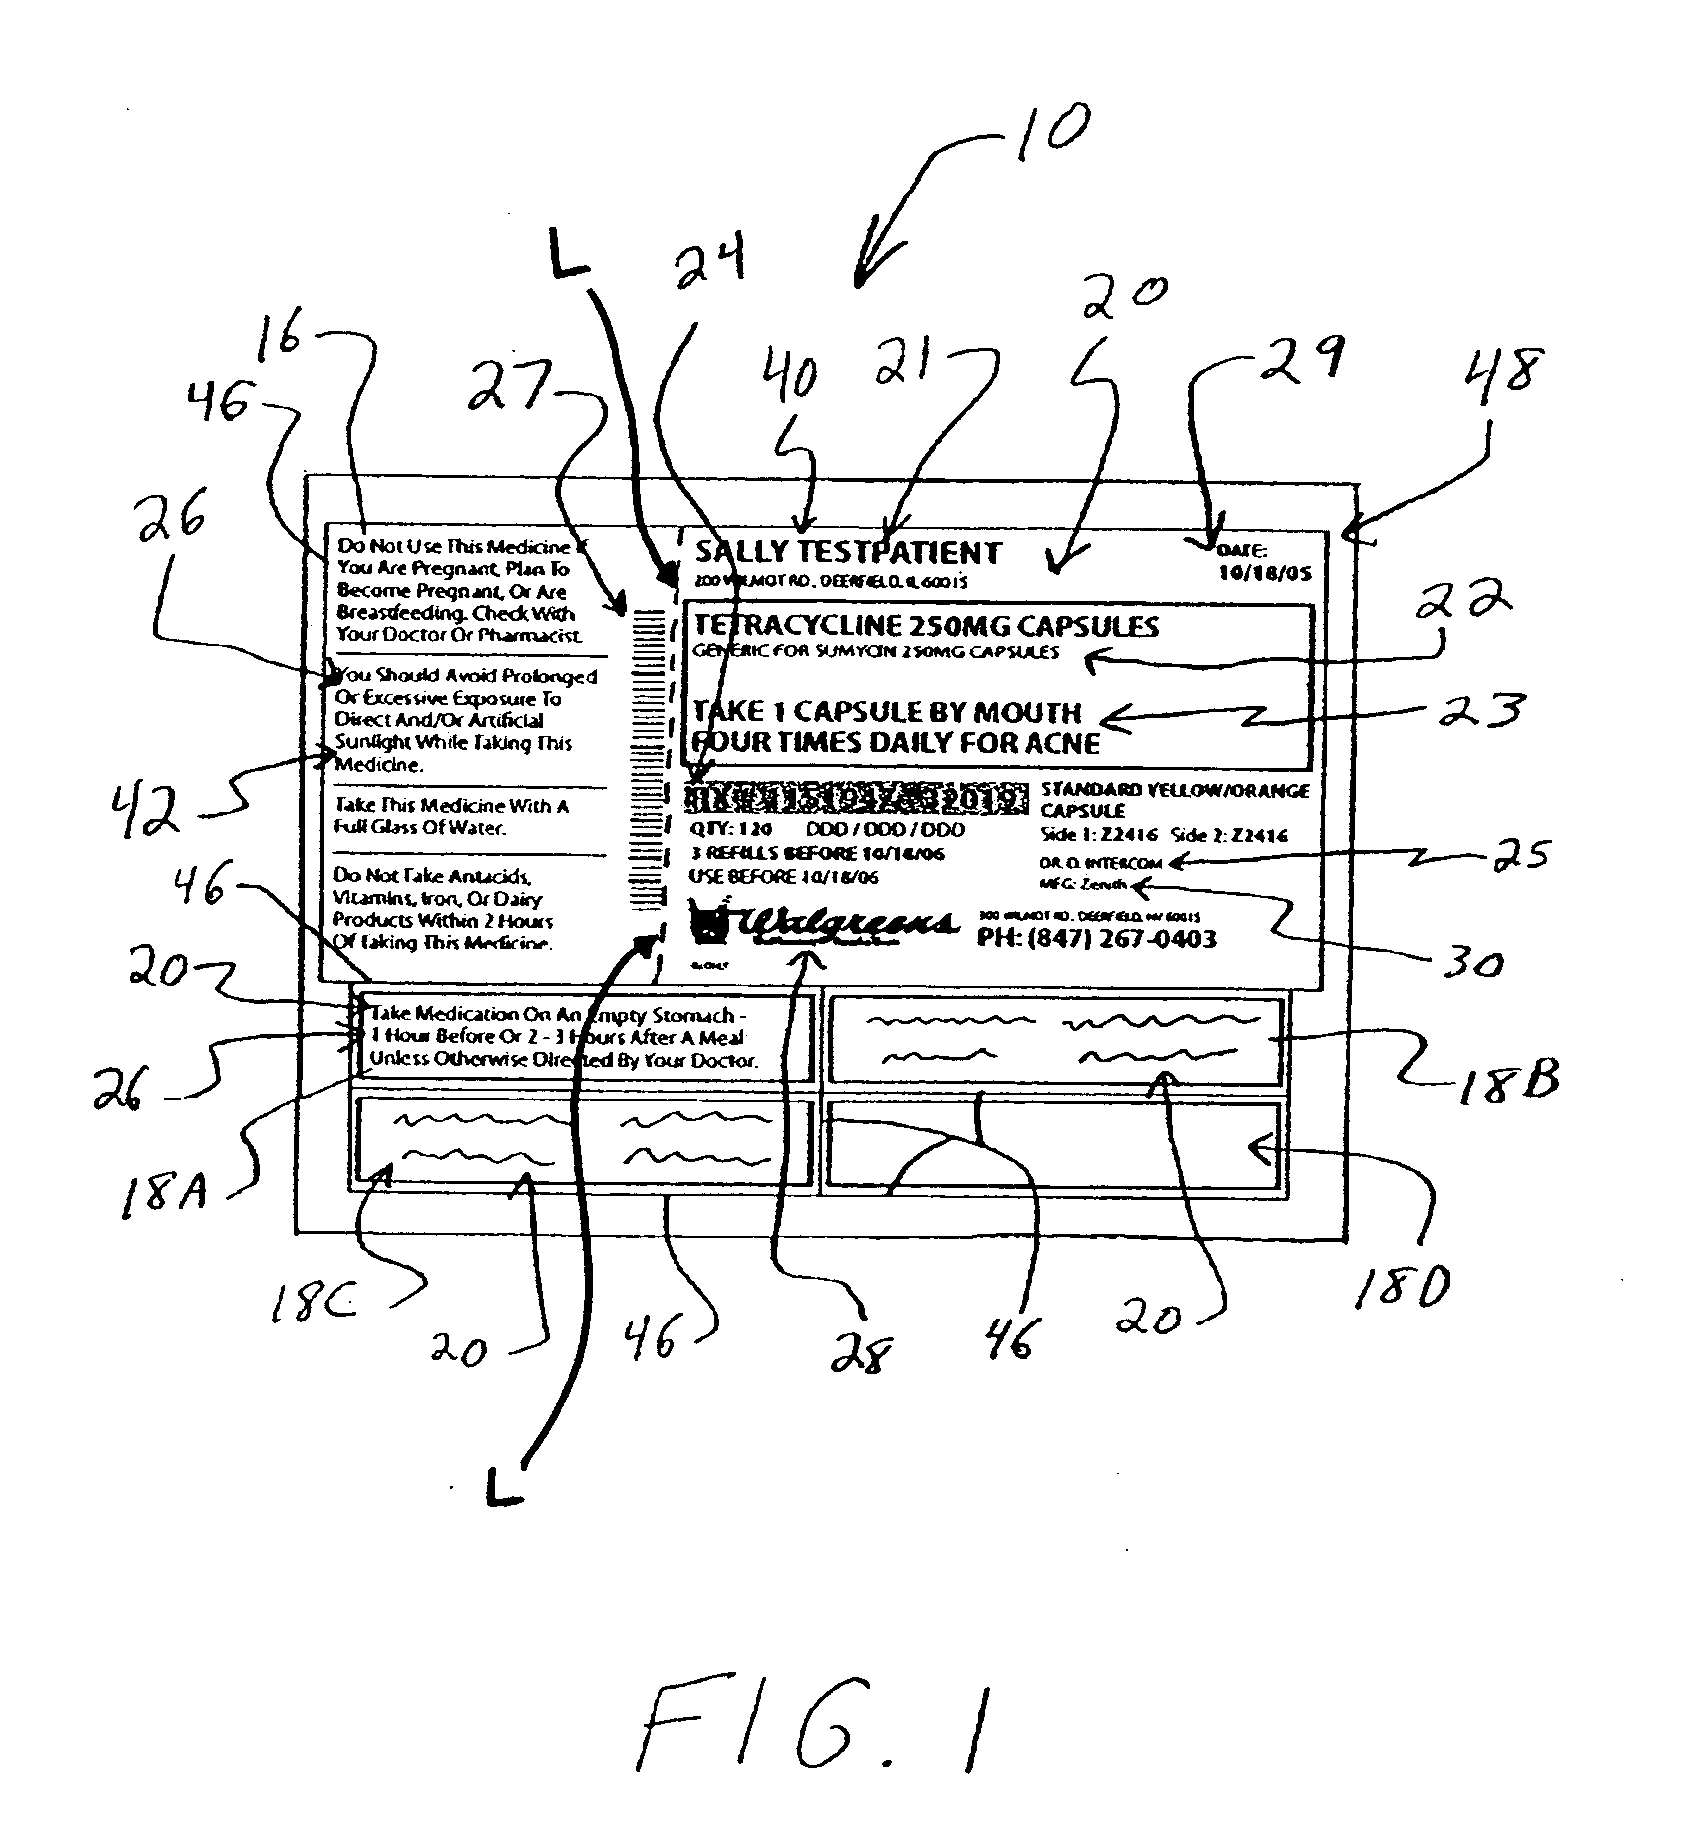 Pharmacy label and method for preparation